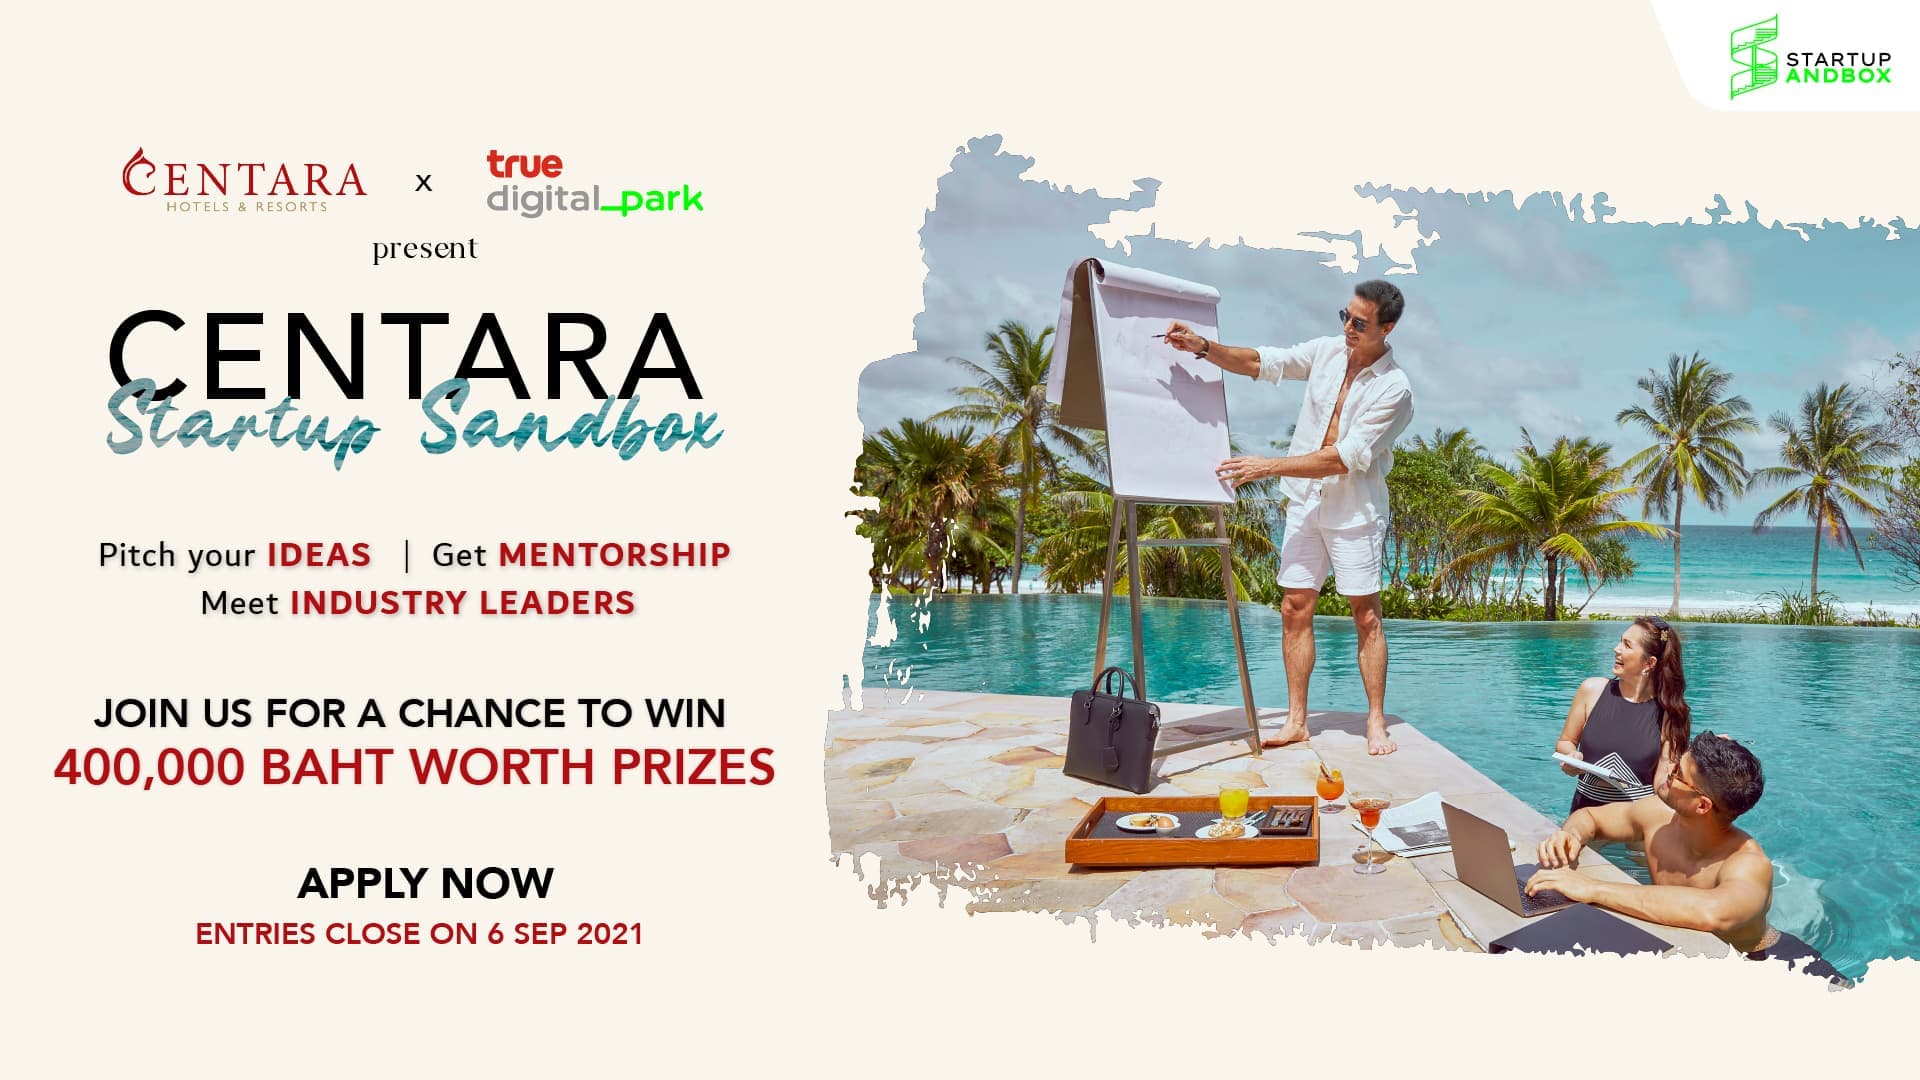 Centara Collaborates with True Digital Park in Startup Competition